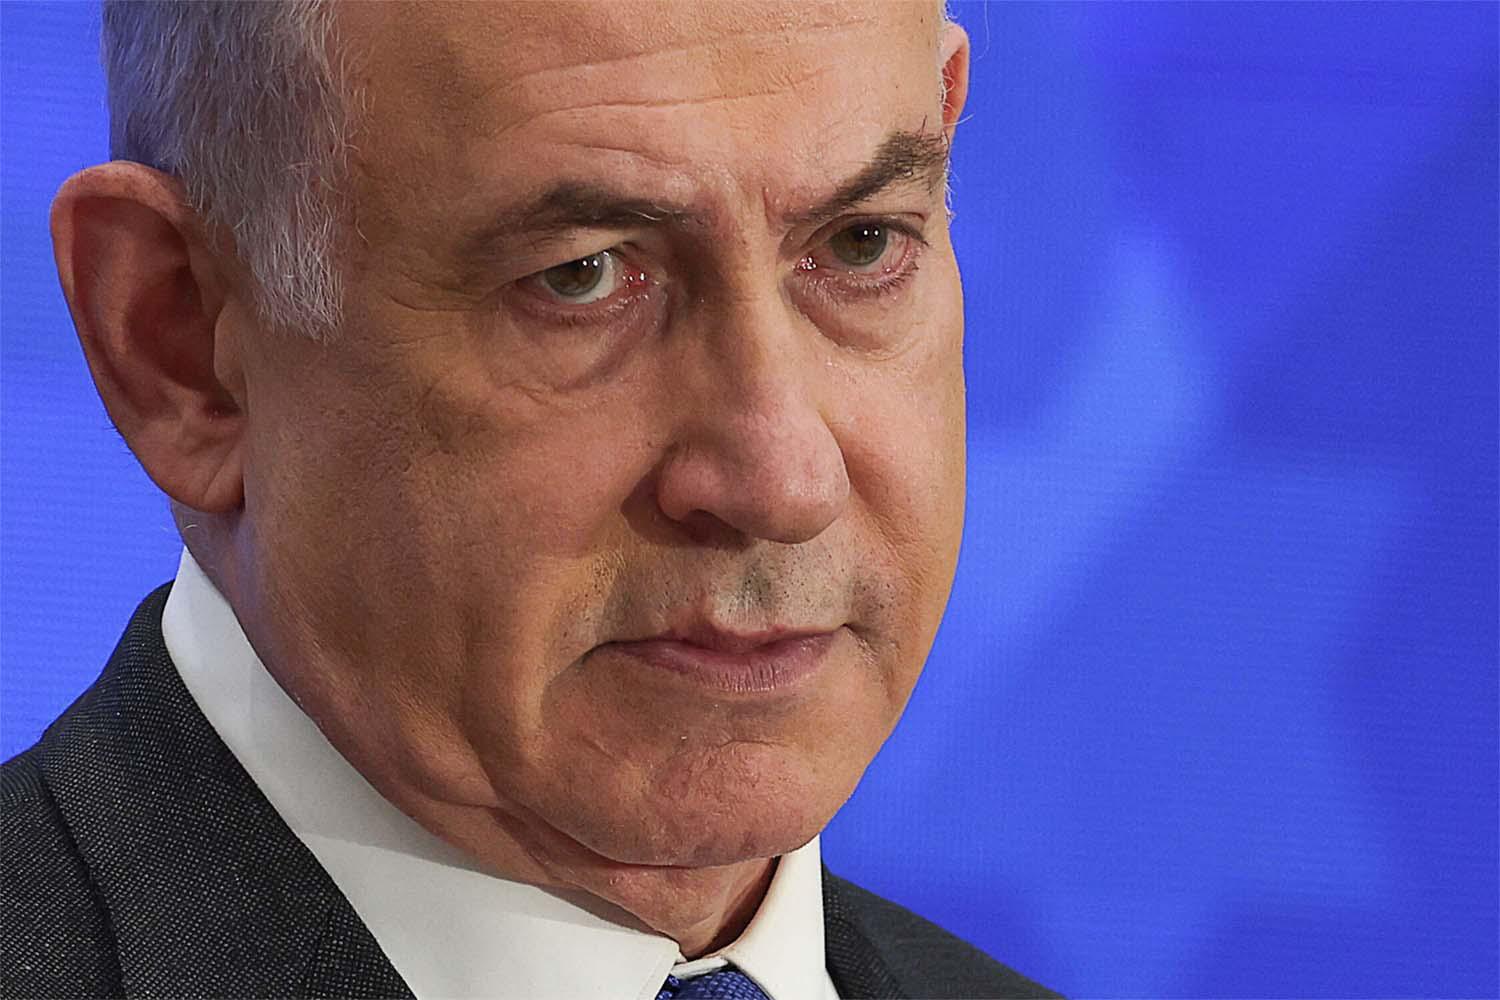 The spokesman for Palestinian President said that Netanyahu's proposal was doomed to fail